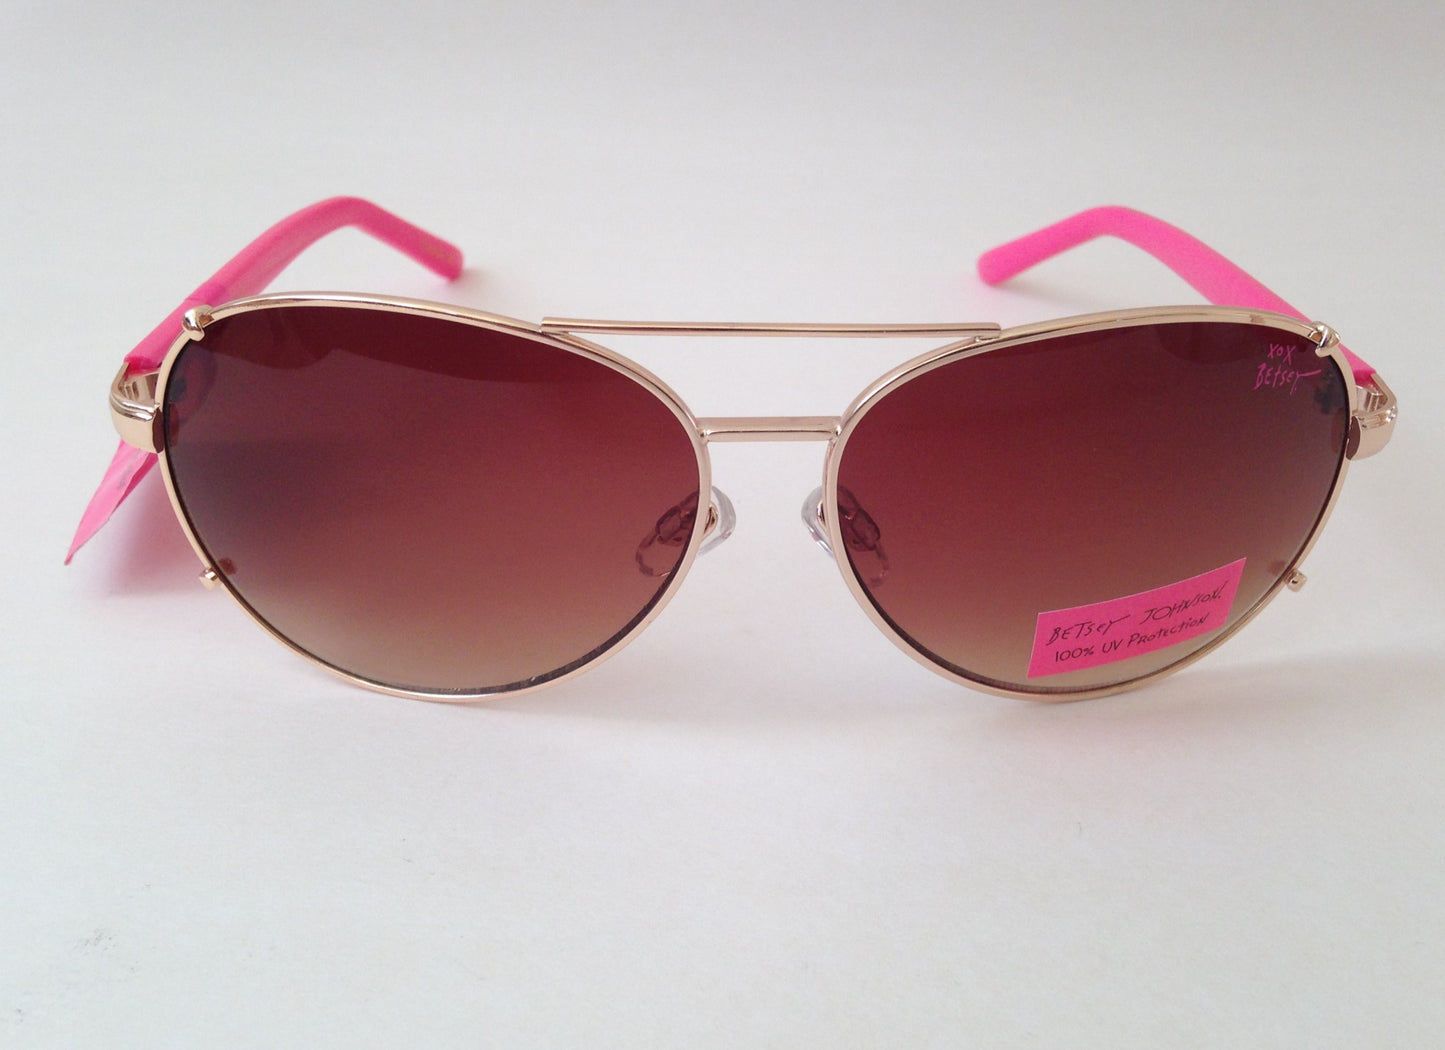 Betsey Johnson Aviator Sunglasses Gold And Pink Frame Brown Gradient Lens - Sunglasses